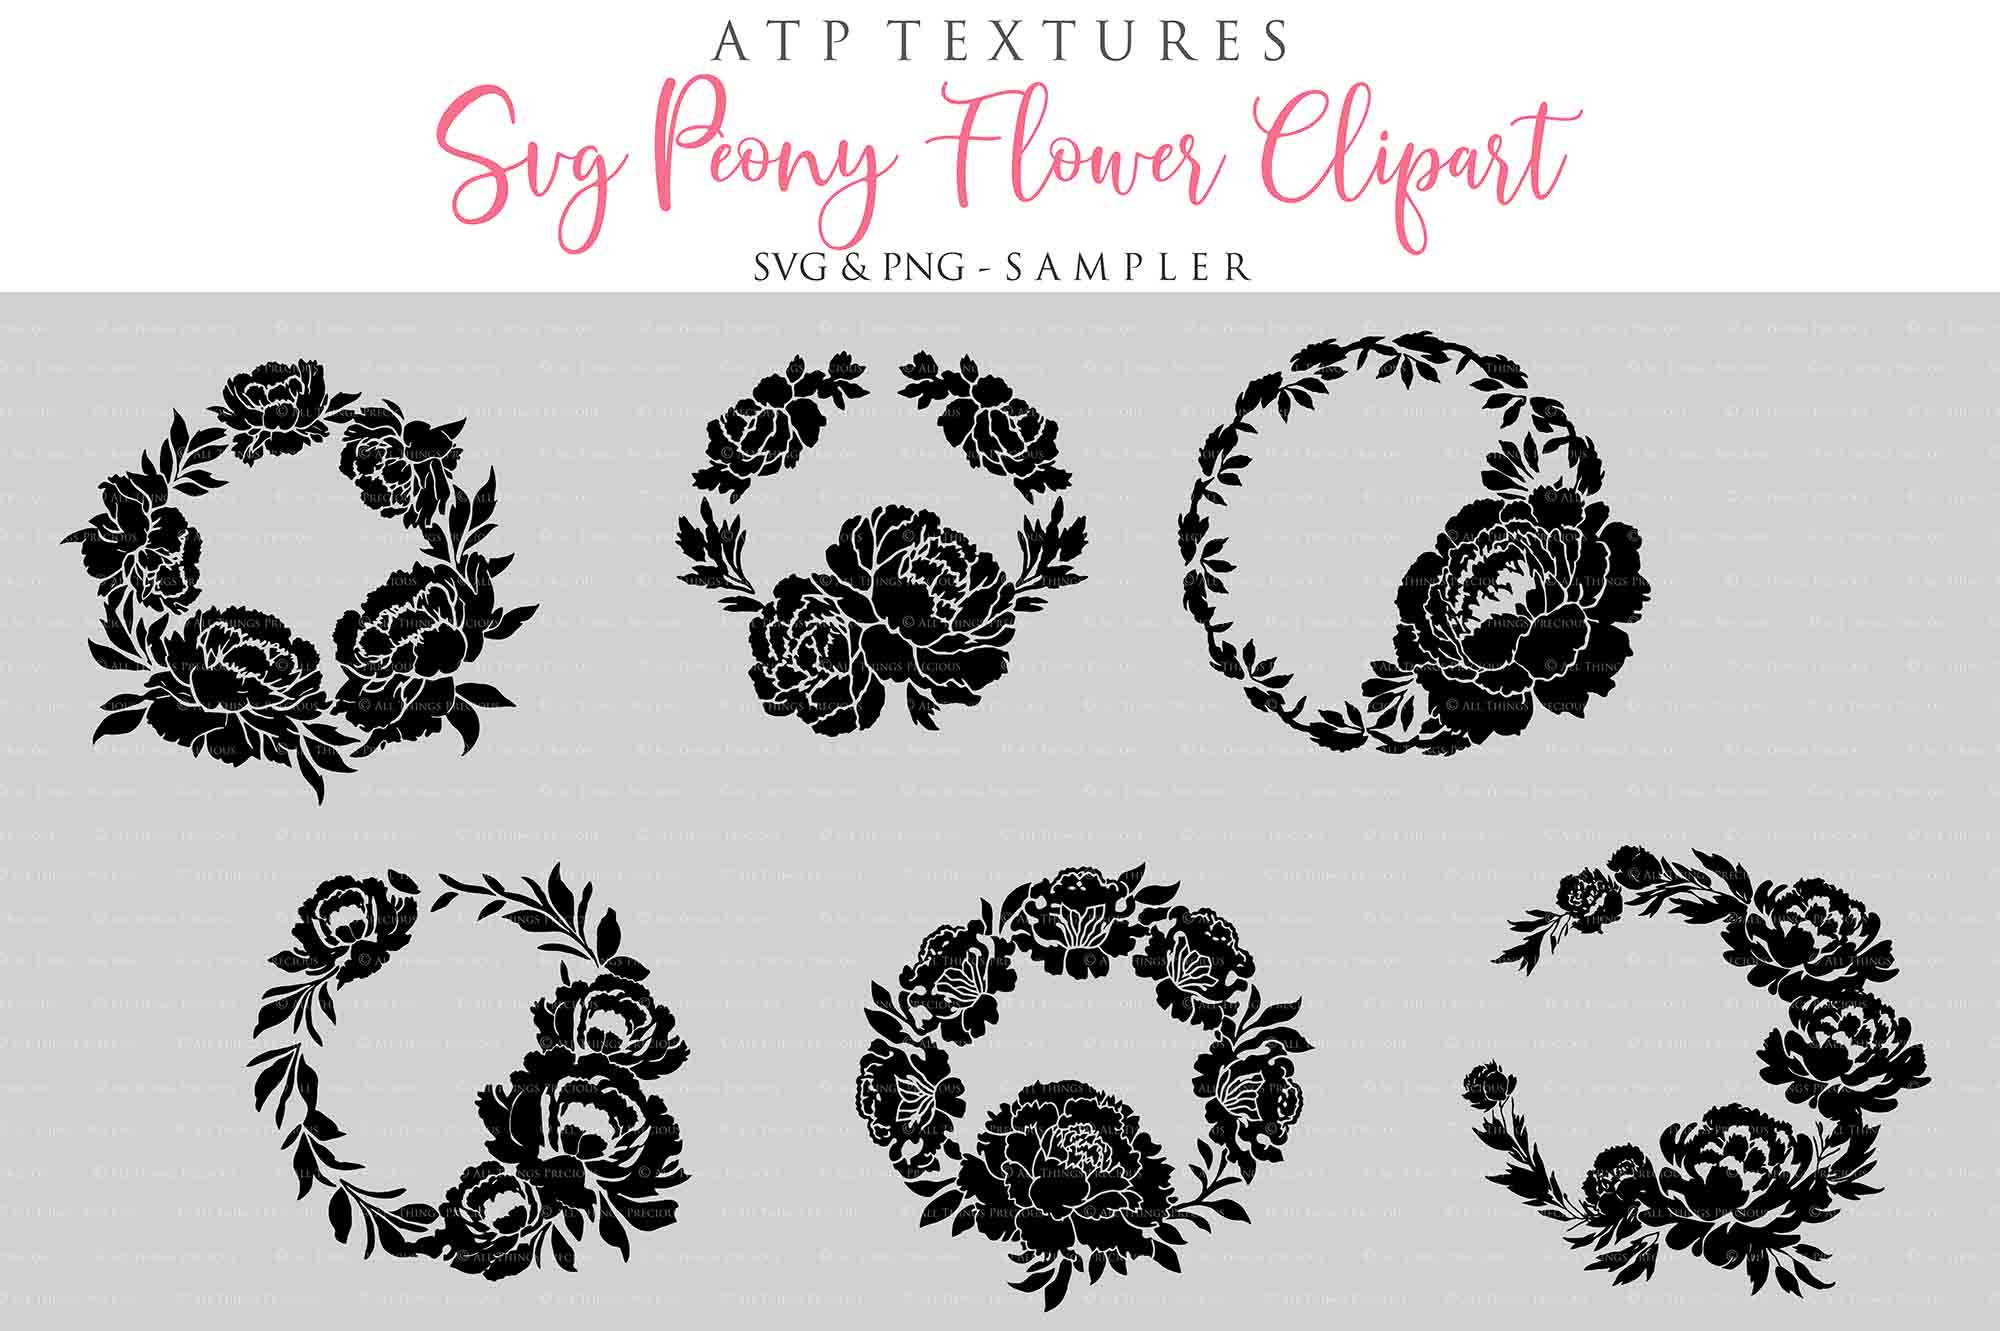 SVG & PNG PEONY WREATH Clipart / Digital Overlays